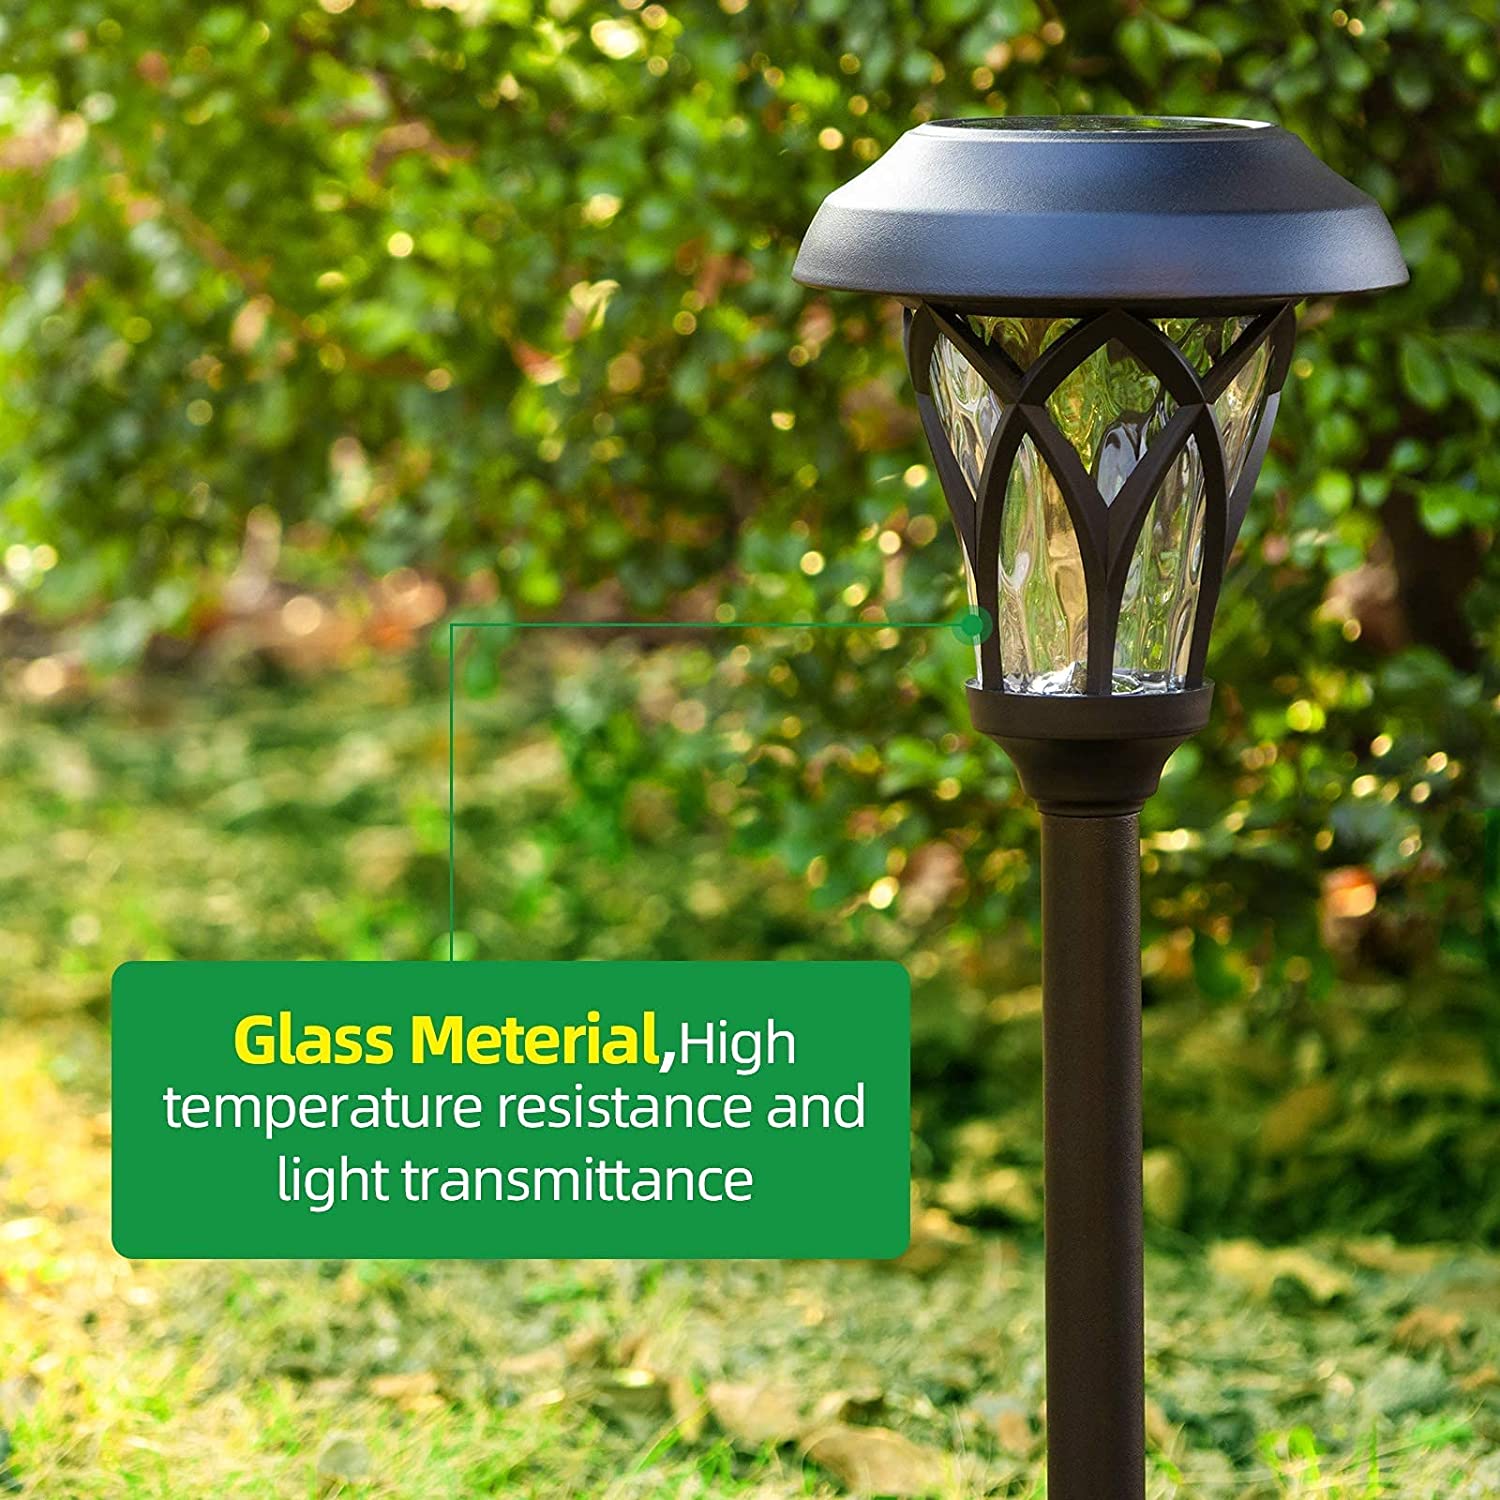 BEAU JARDIN Pack Solar Lights Pathway Outdoor Waterproof Supper Bright Up to 12 Hrs Glass Stainless Steel Metal Auto On Off Solar Powered Landscape - 2